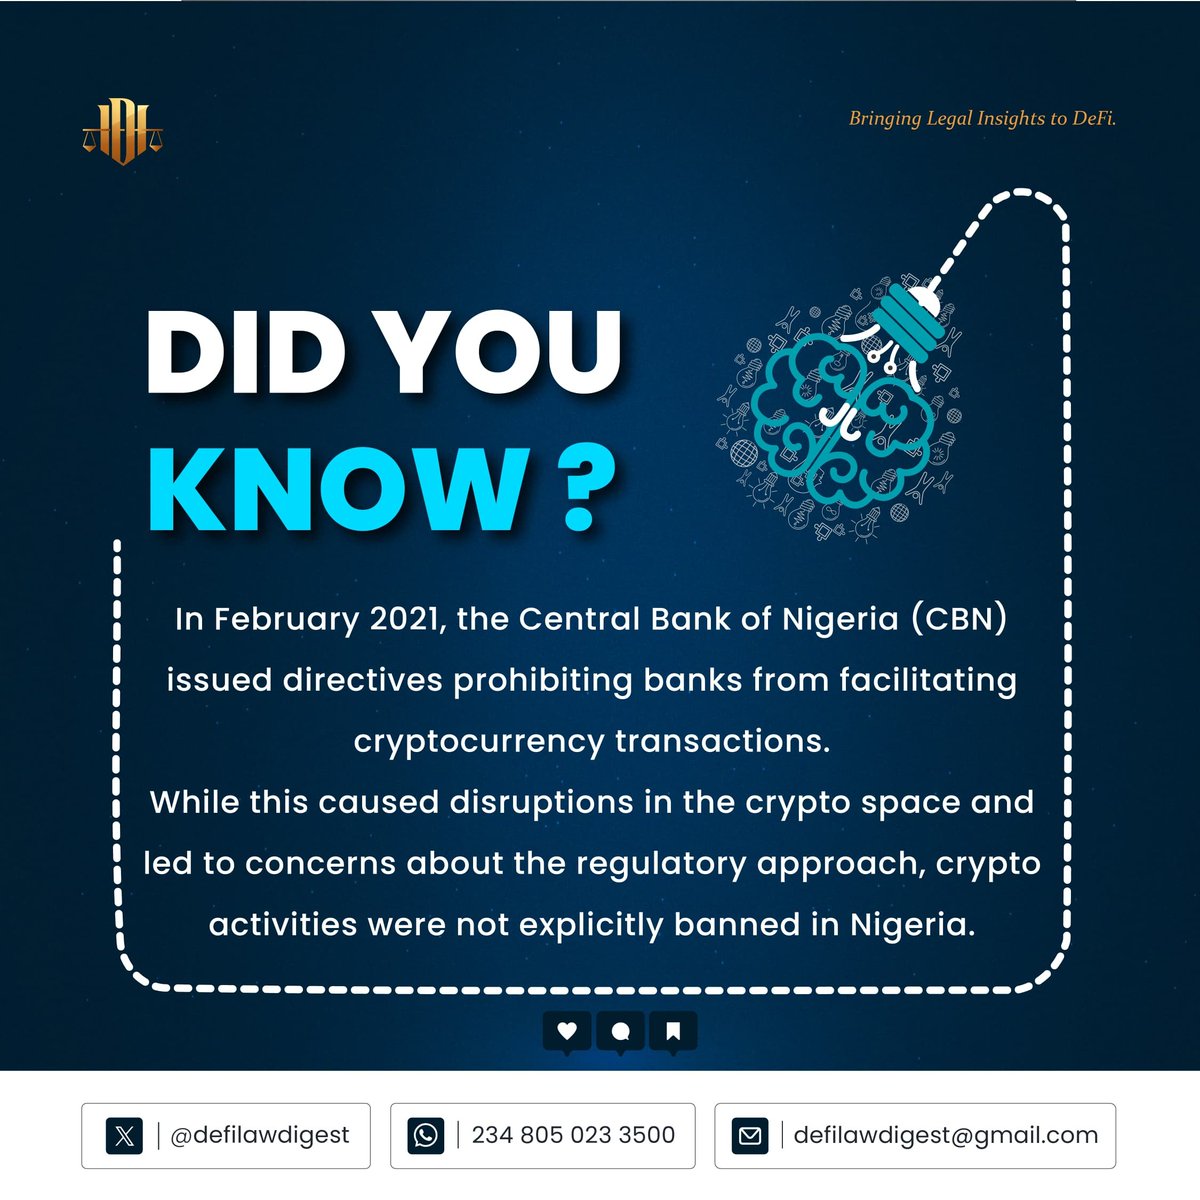 GM, CX! Here's some fresh knowledge from us to you! Don't worry, you don't have to thank us. Just read and learn!😉⚖️ #DeFi #Blockchain #DeFiEducation #Crypto #DeFiLaw #DeFiLawDigest #DLD #DYKwithDLD #Nigeria.